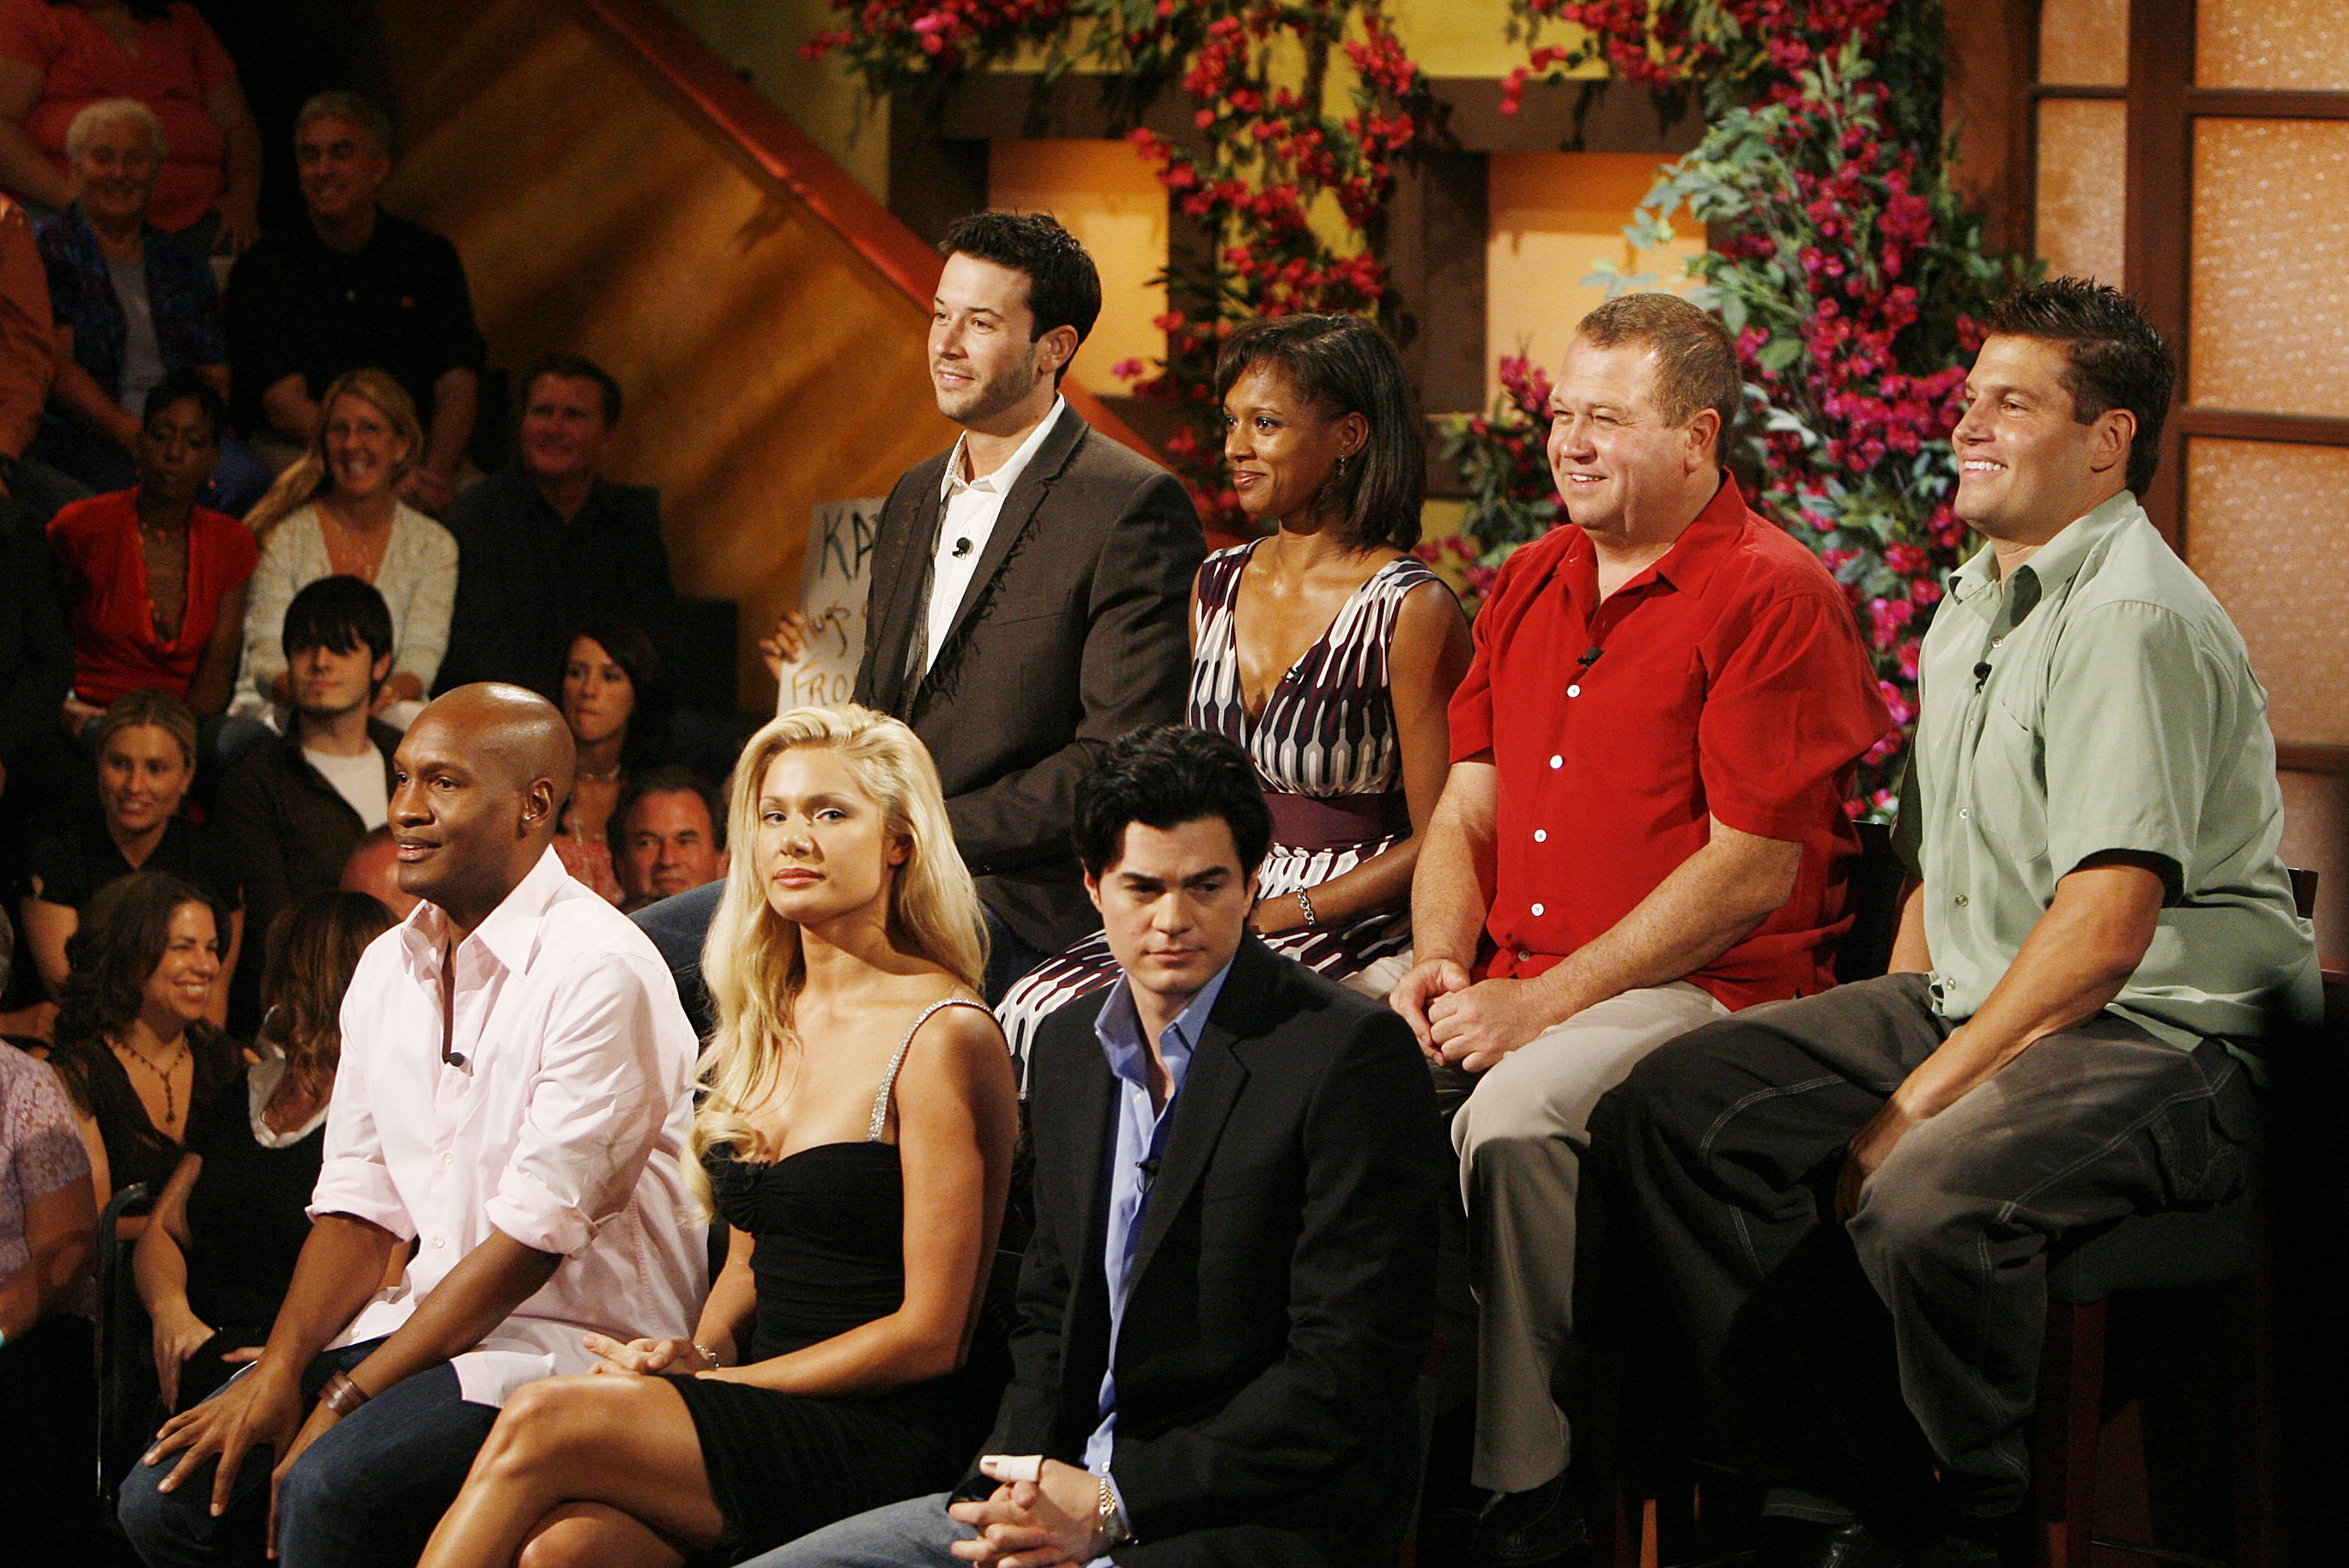 The Jury, (Front, L to R) Marcellas Reynolds, Janelle Pierzina, Will Kirby, (rear, L to R) James Rhine, Danielle Reyes, George Boswell and Howie Gordon appear onstage at Big Brother 7: All-Stars